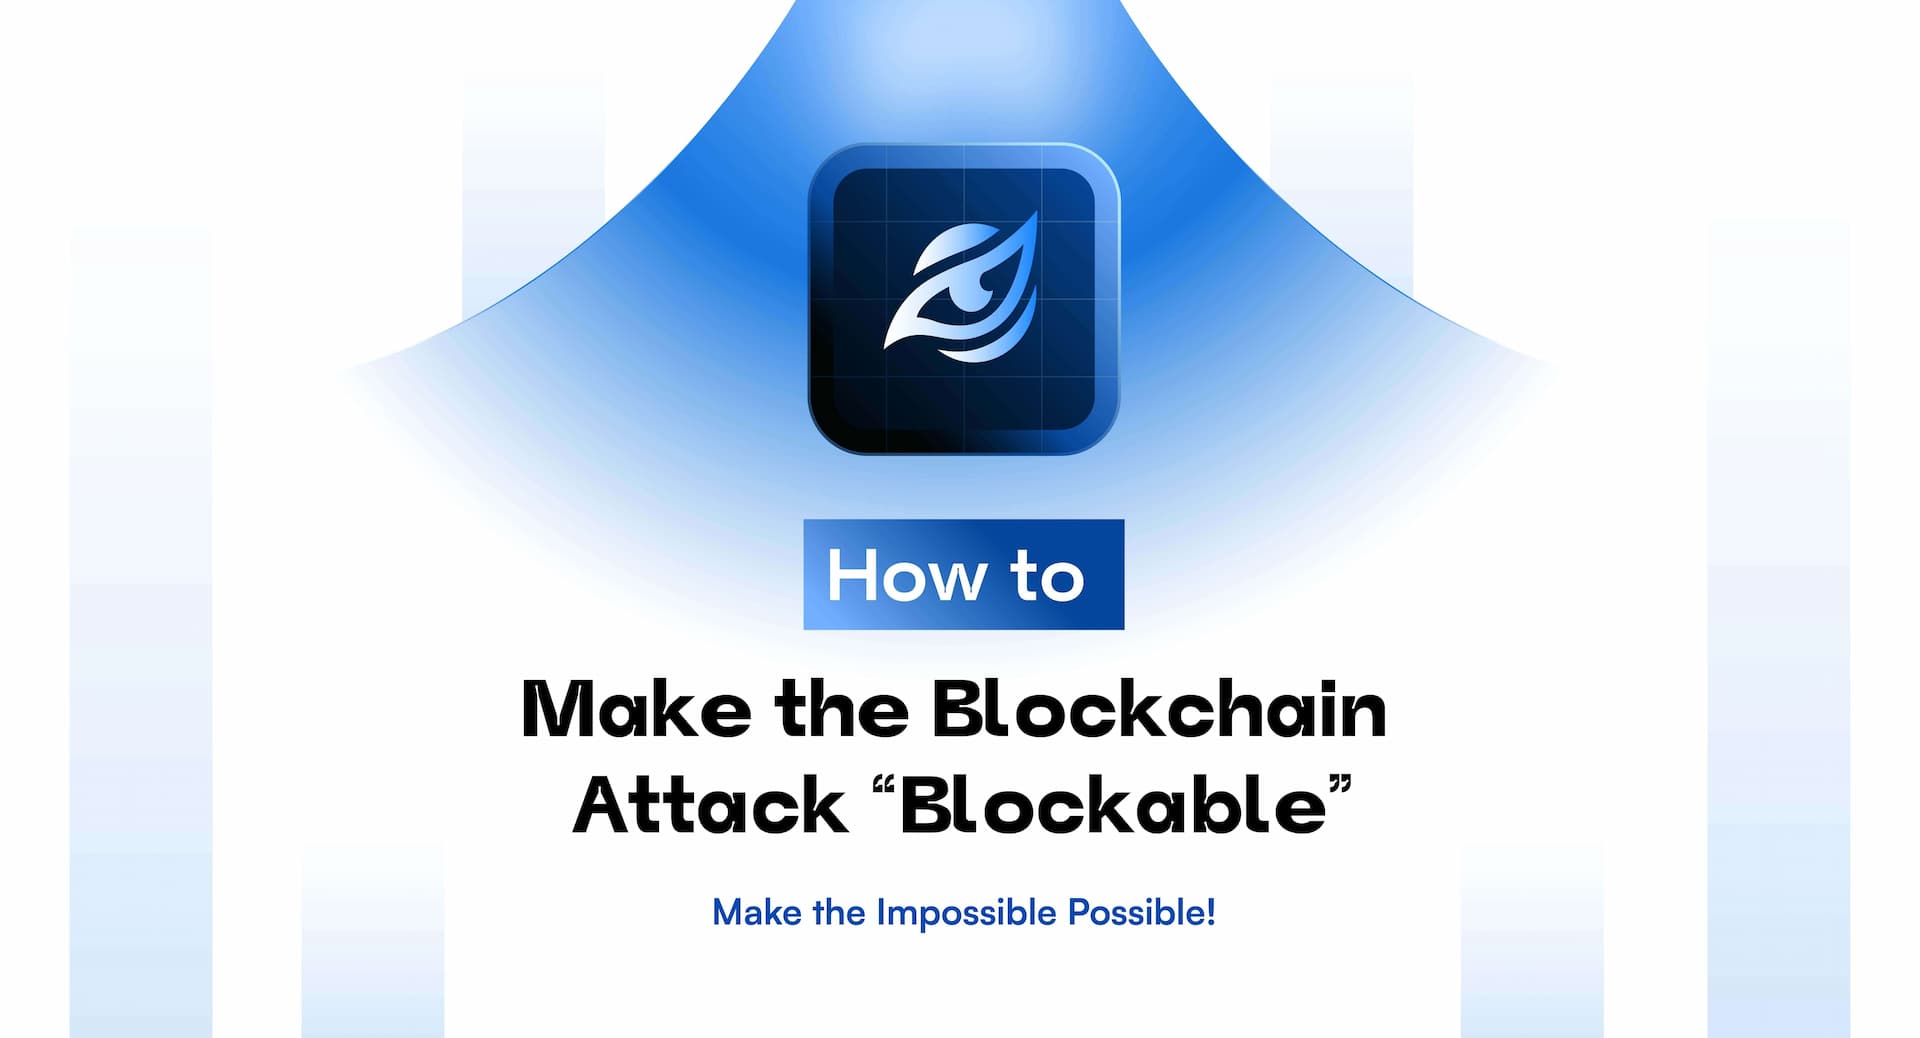 How to Make the Blockchain Attack “Blockable”